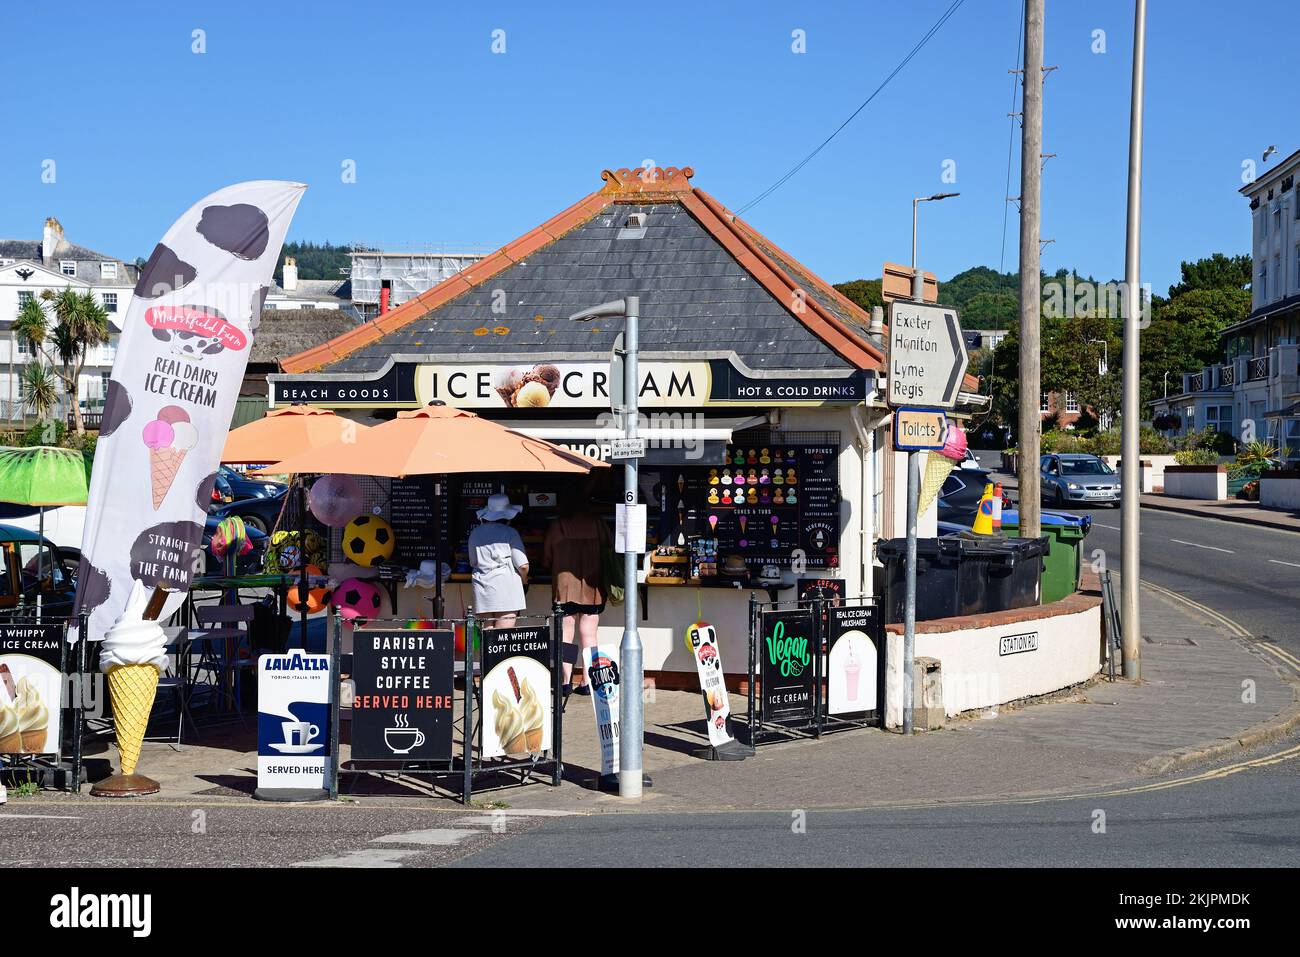 Tourists relaxing at an ice cream parlour along the seafront, Sidmouth, Devon, UK, Europe. Stock Photo